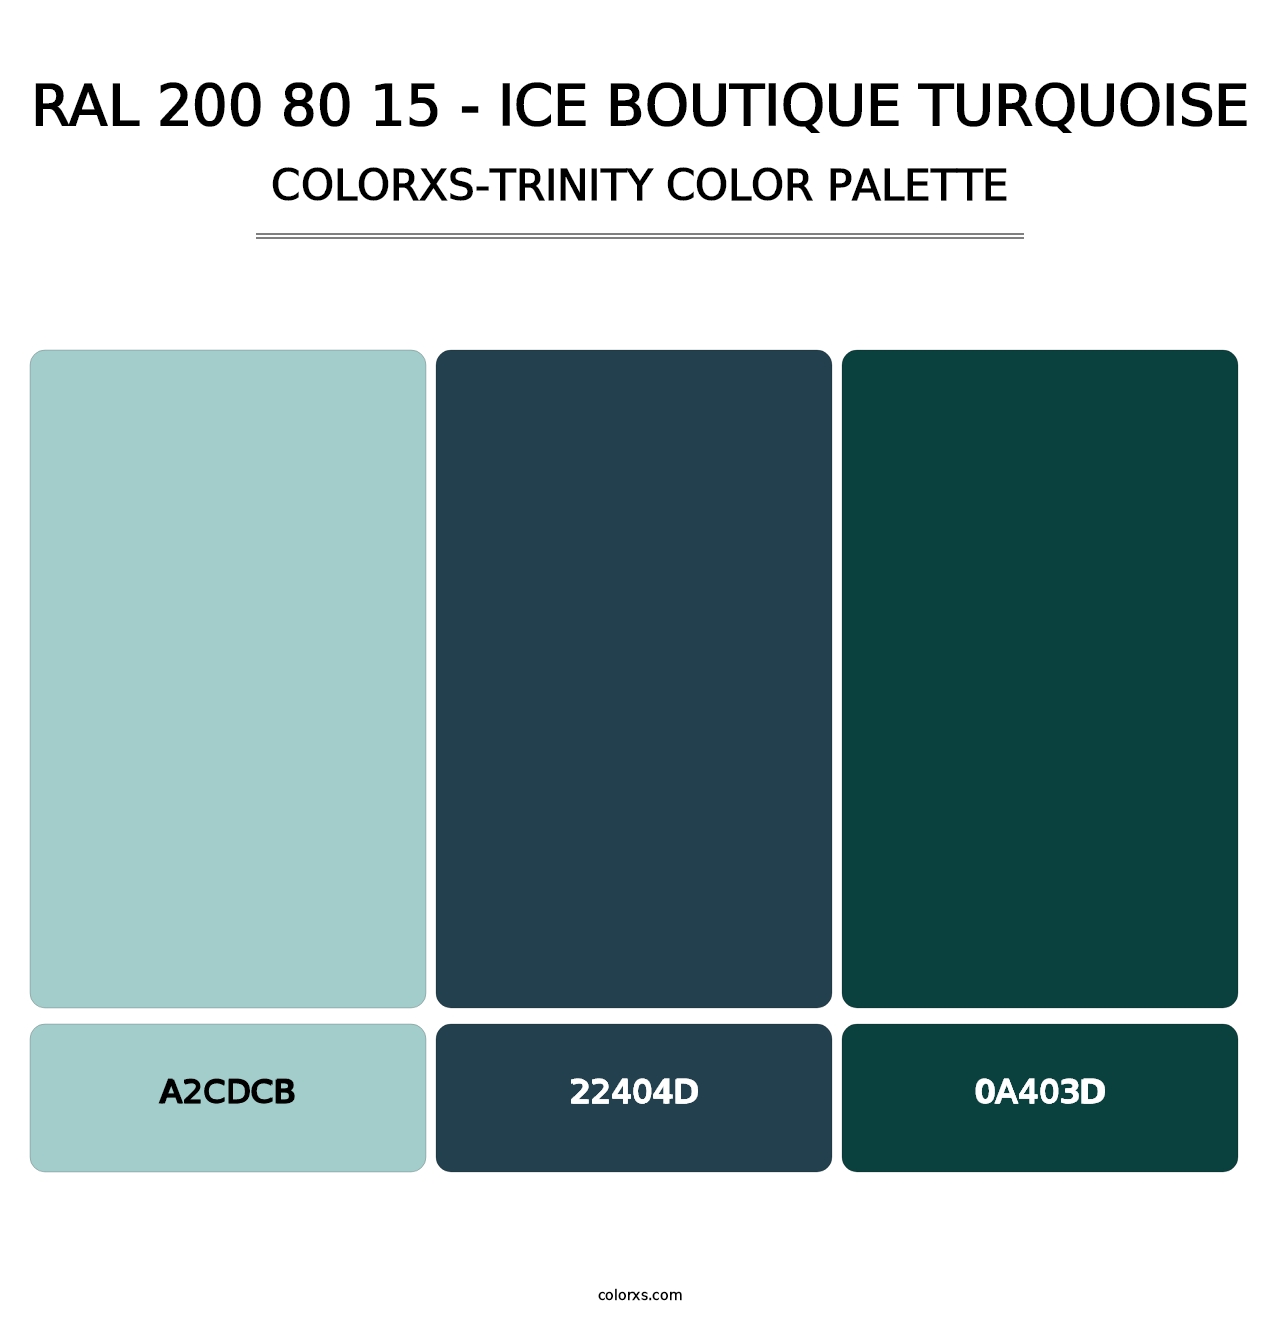 RAL 200 80 15 - Ice Boutique Turquoise - Colorxs Trinity Palette